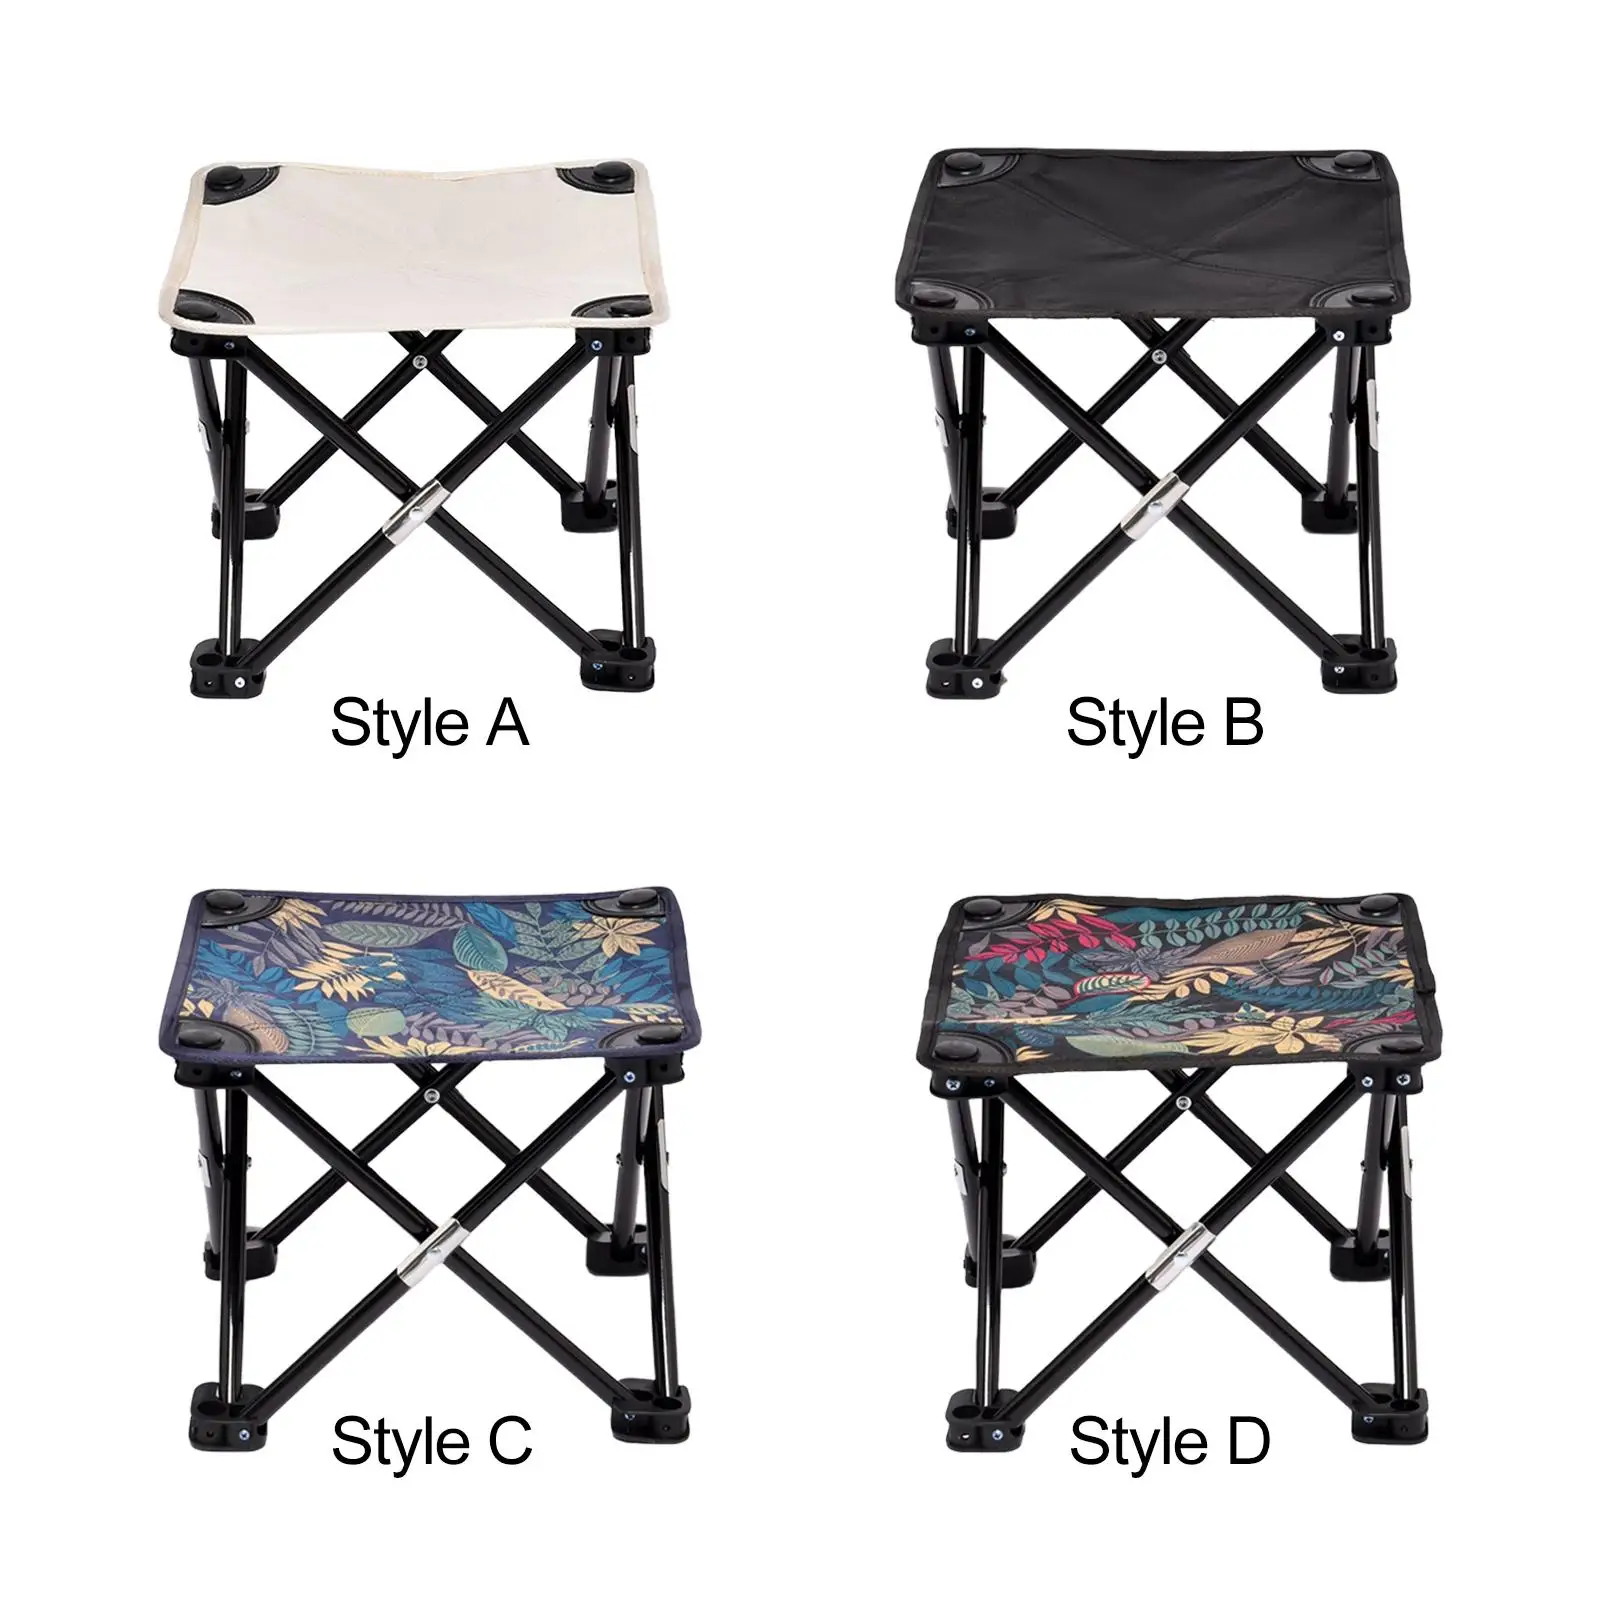 Foldable Footstool Reusable Portable Saddle Chair Camping Chair Foot Stool for Picnic Traveling Backpacking Walking Hiking Patio